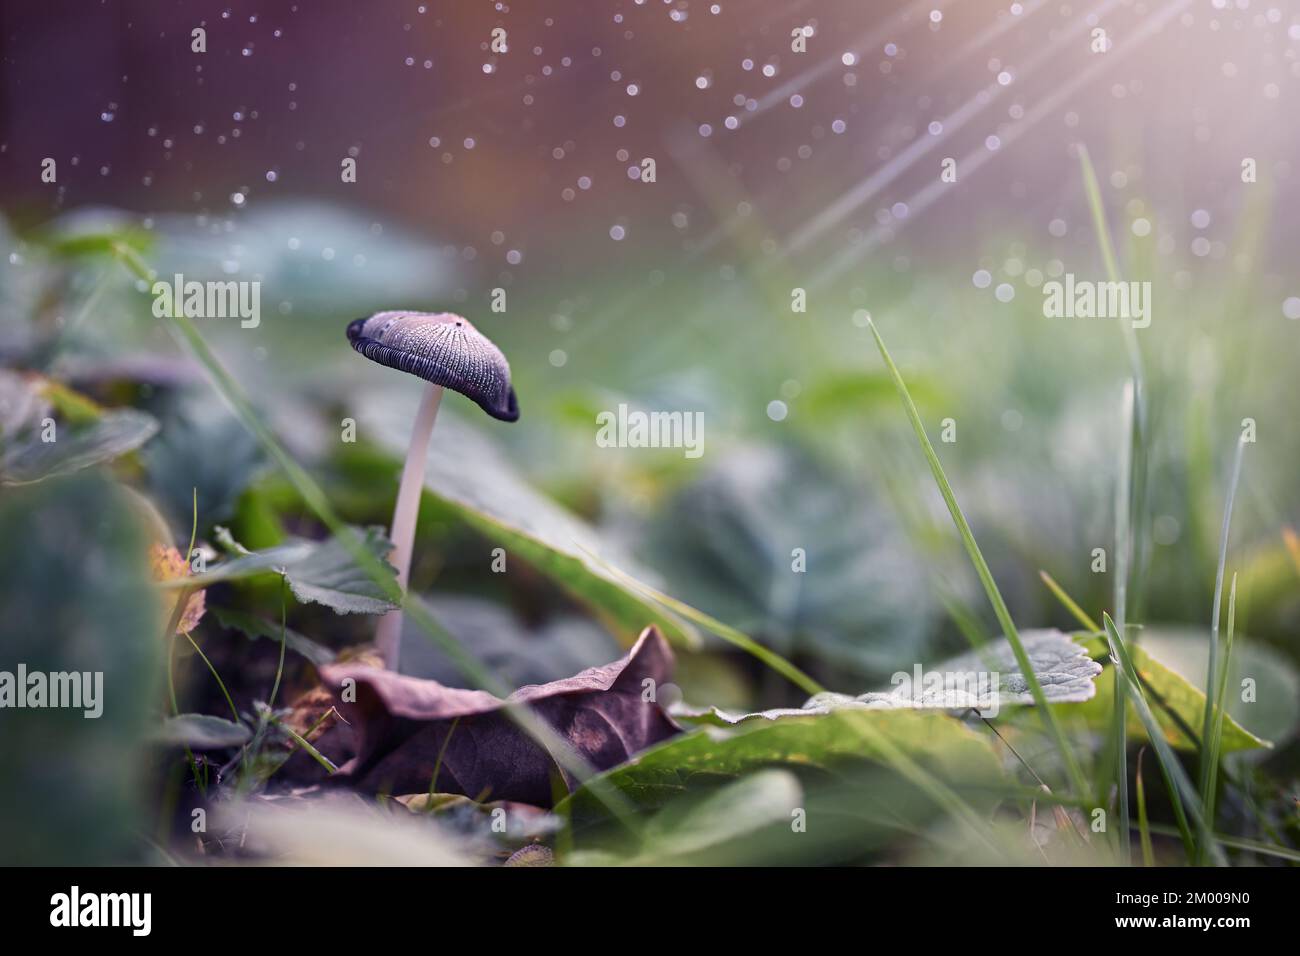 One unusual mushroom in the forest. Sunburst and bokeh effect overlay. Place for text. Stock Photo